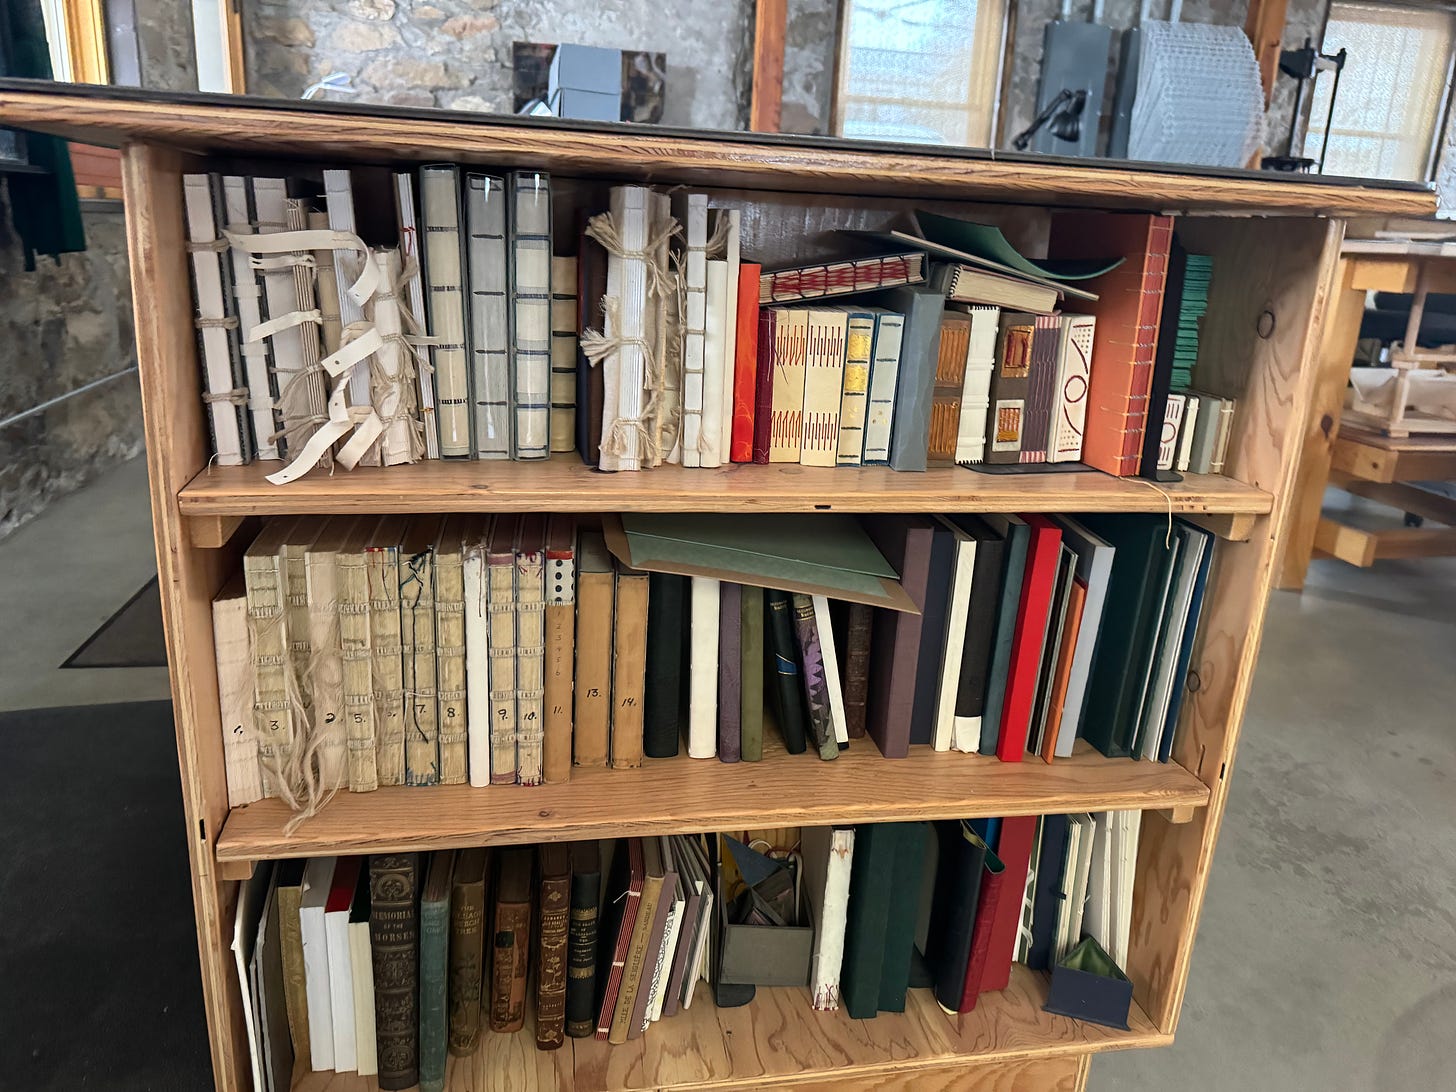 A wooden bookshelf filled with books. The books have spines of various kinds and are used as references for bookbinders to look at while they practice.